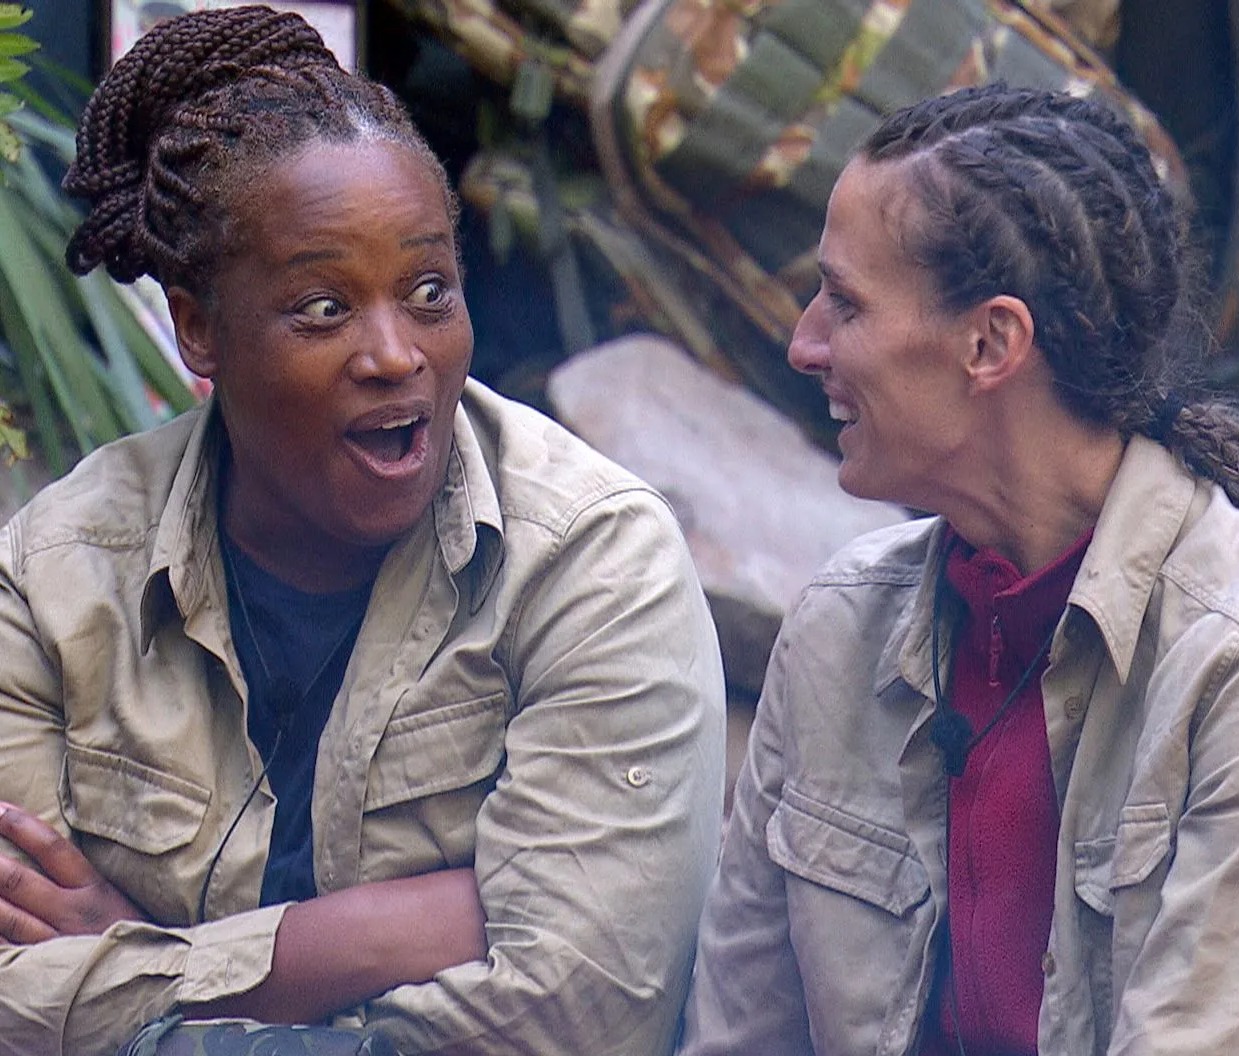 I’m A Celeb to air bumper movie-length episode tonight to fit in all the eviction drama